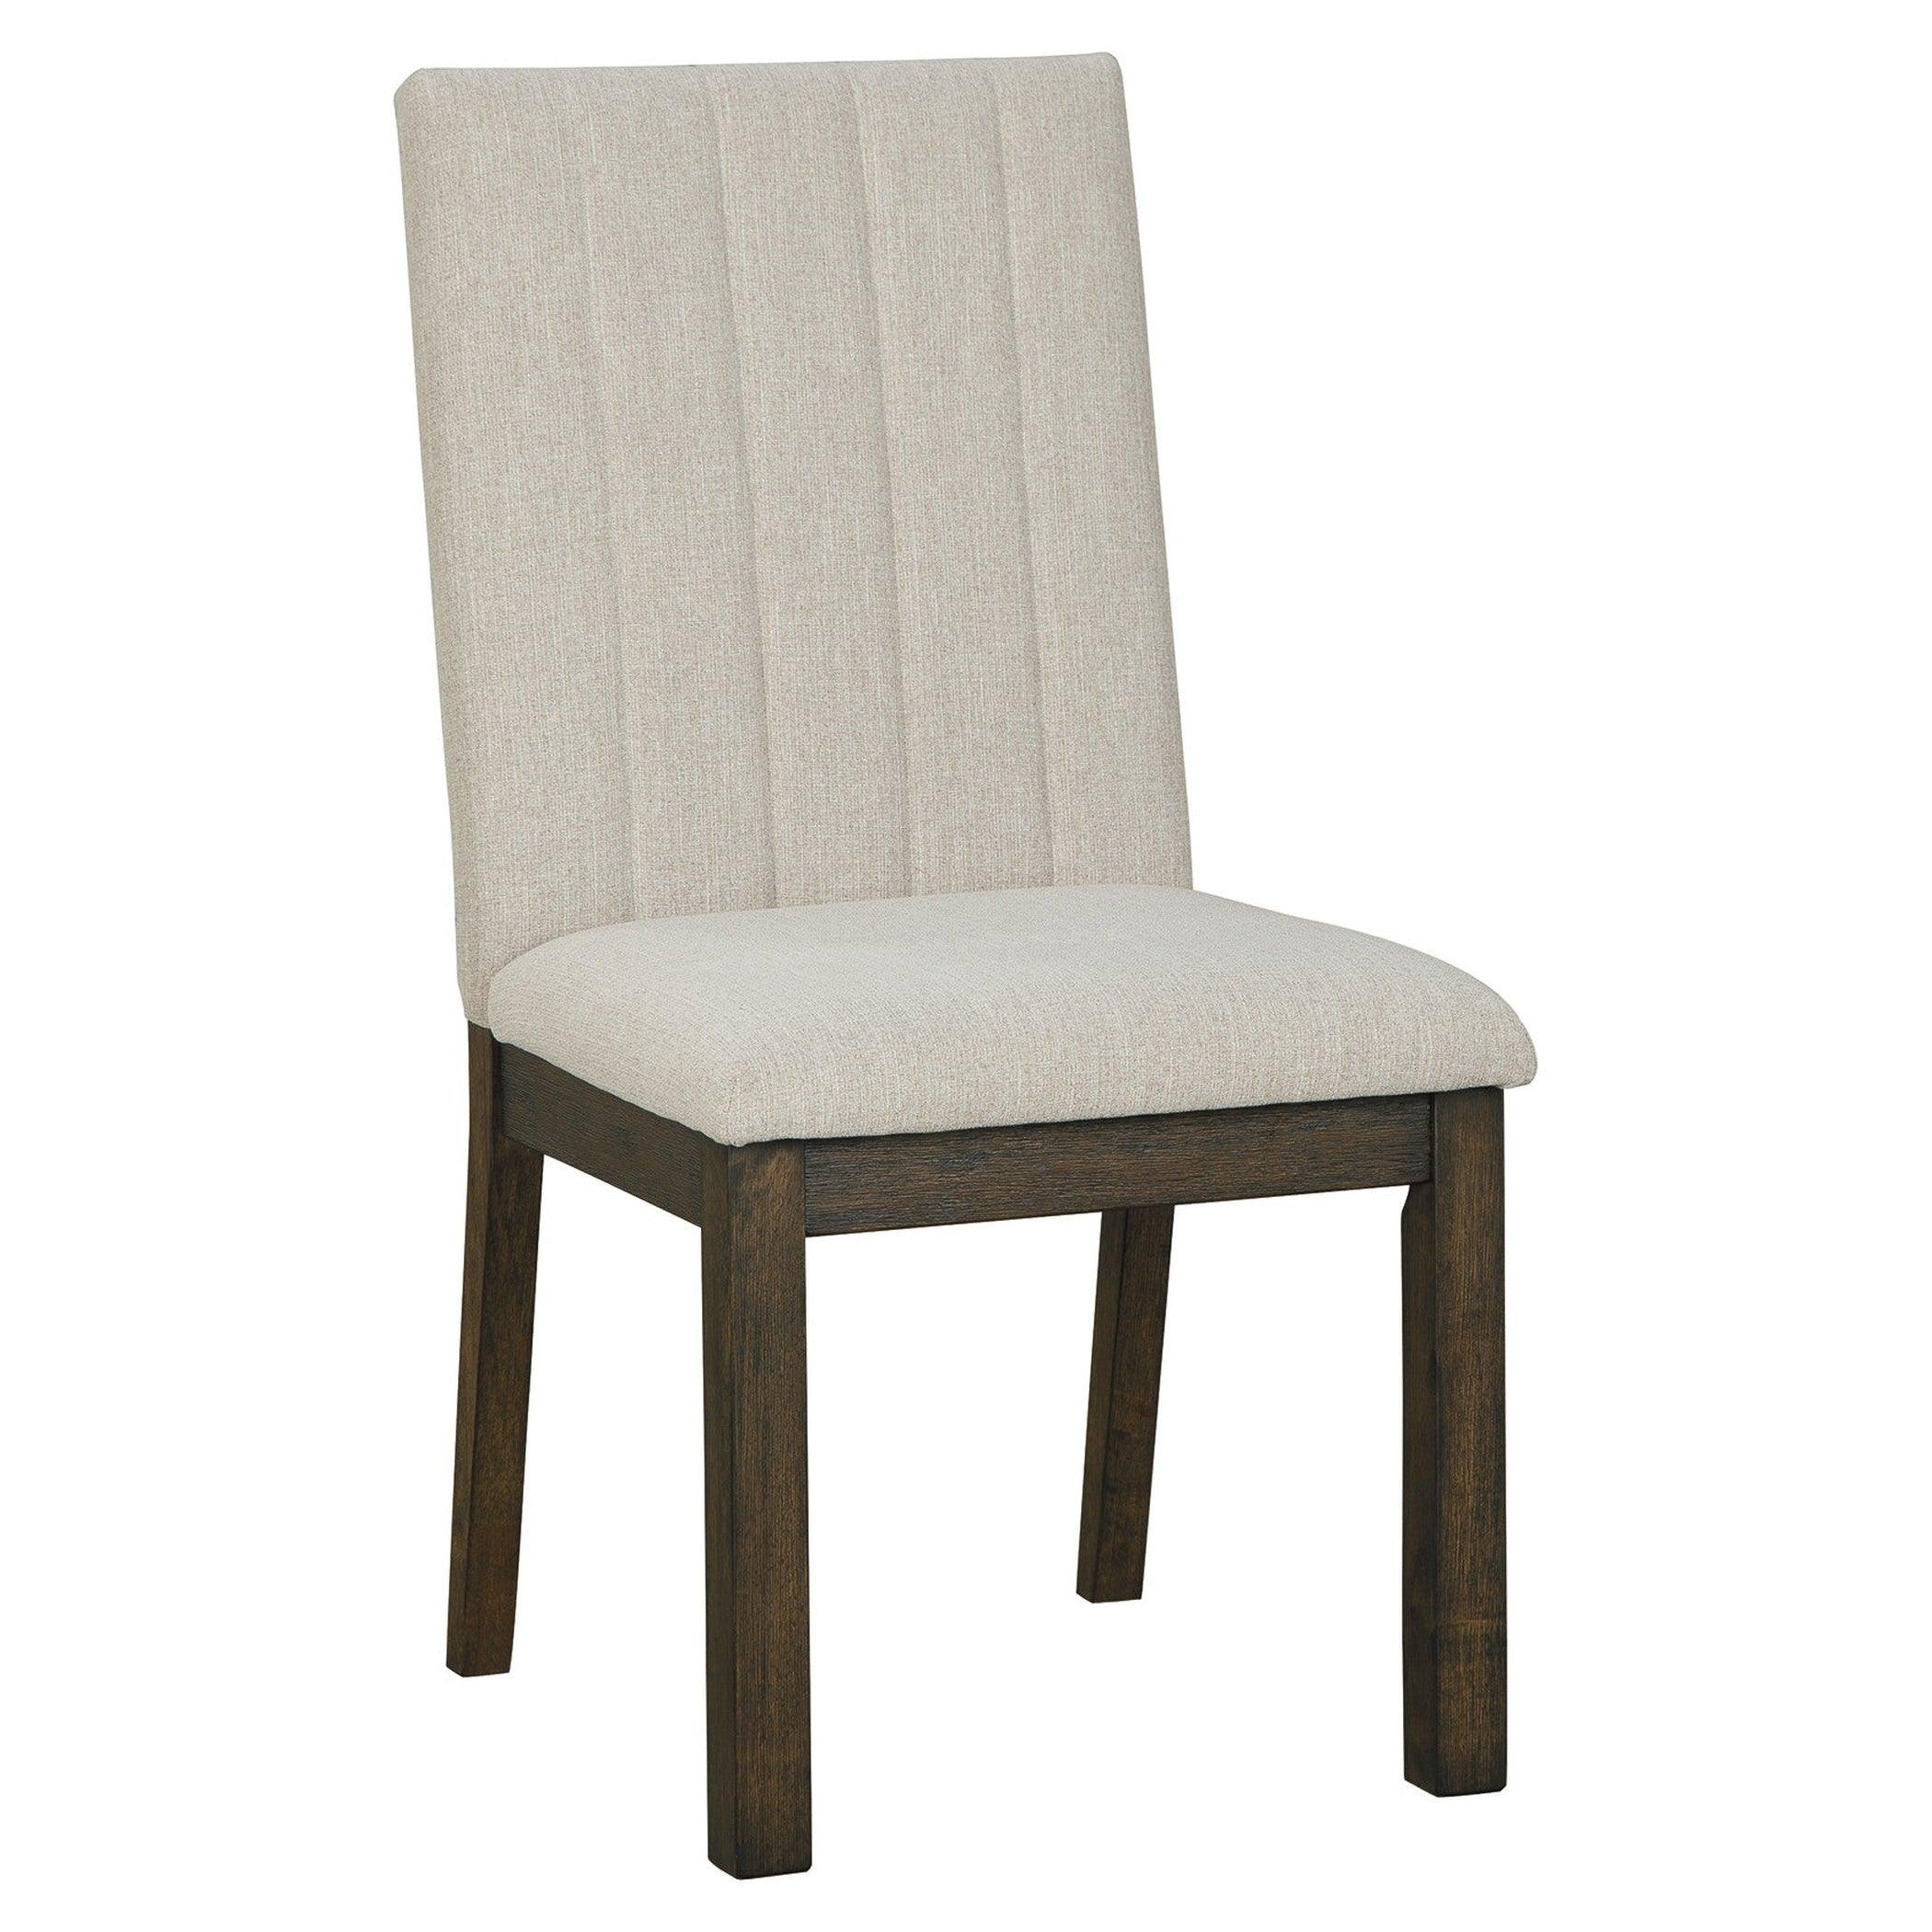 Dellbeck Dining Chair Ash-D748-01